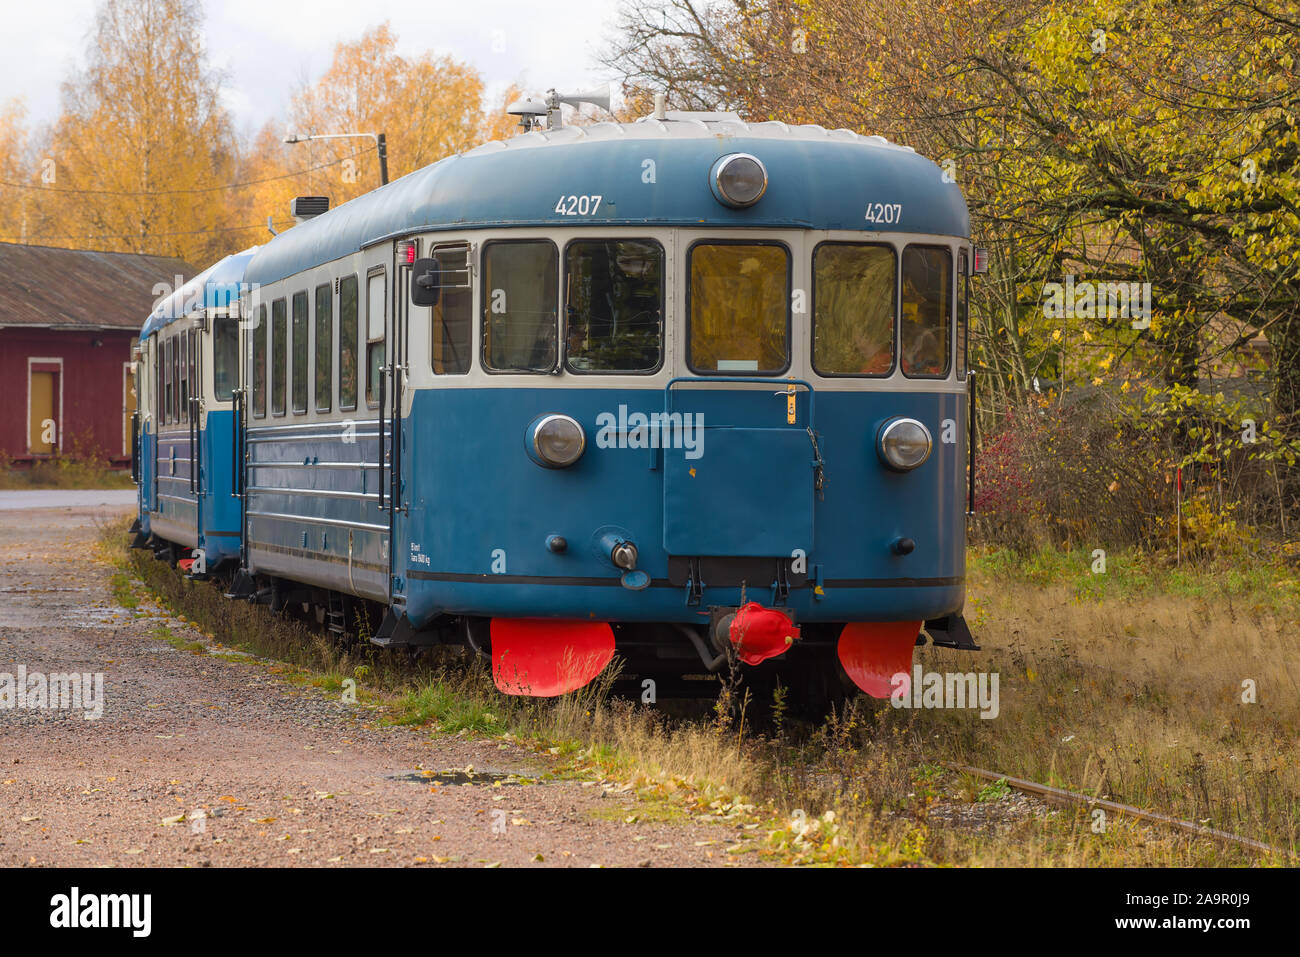 PORVOO, FINLAND - OCTOBER 19, 2019: Passenger retro train close-up on a cloudy October day Stock Photo